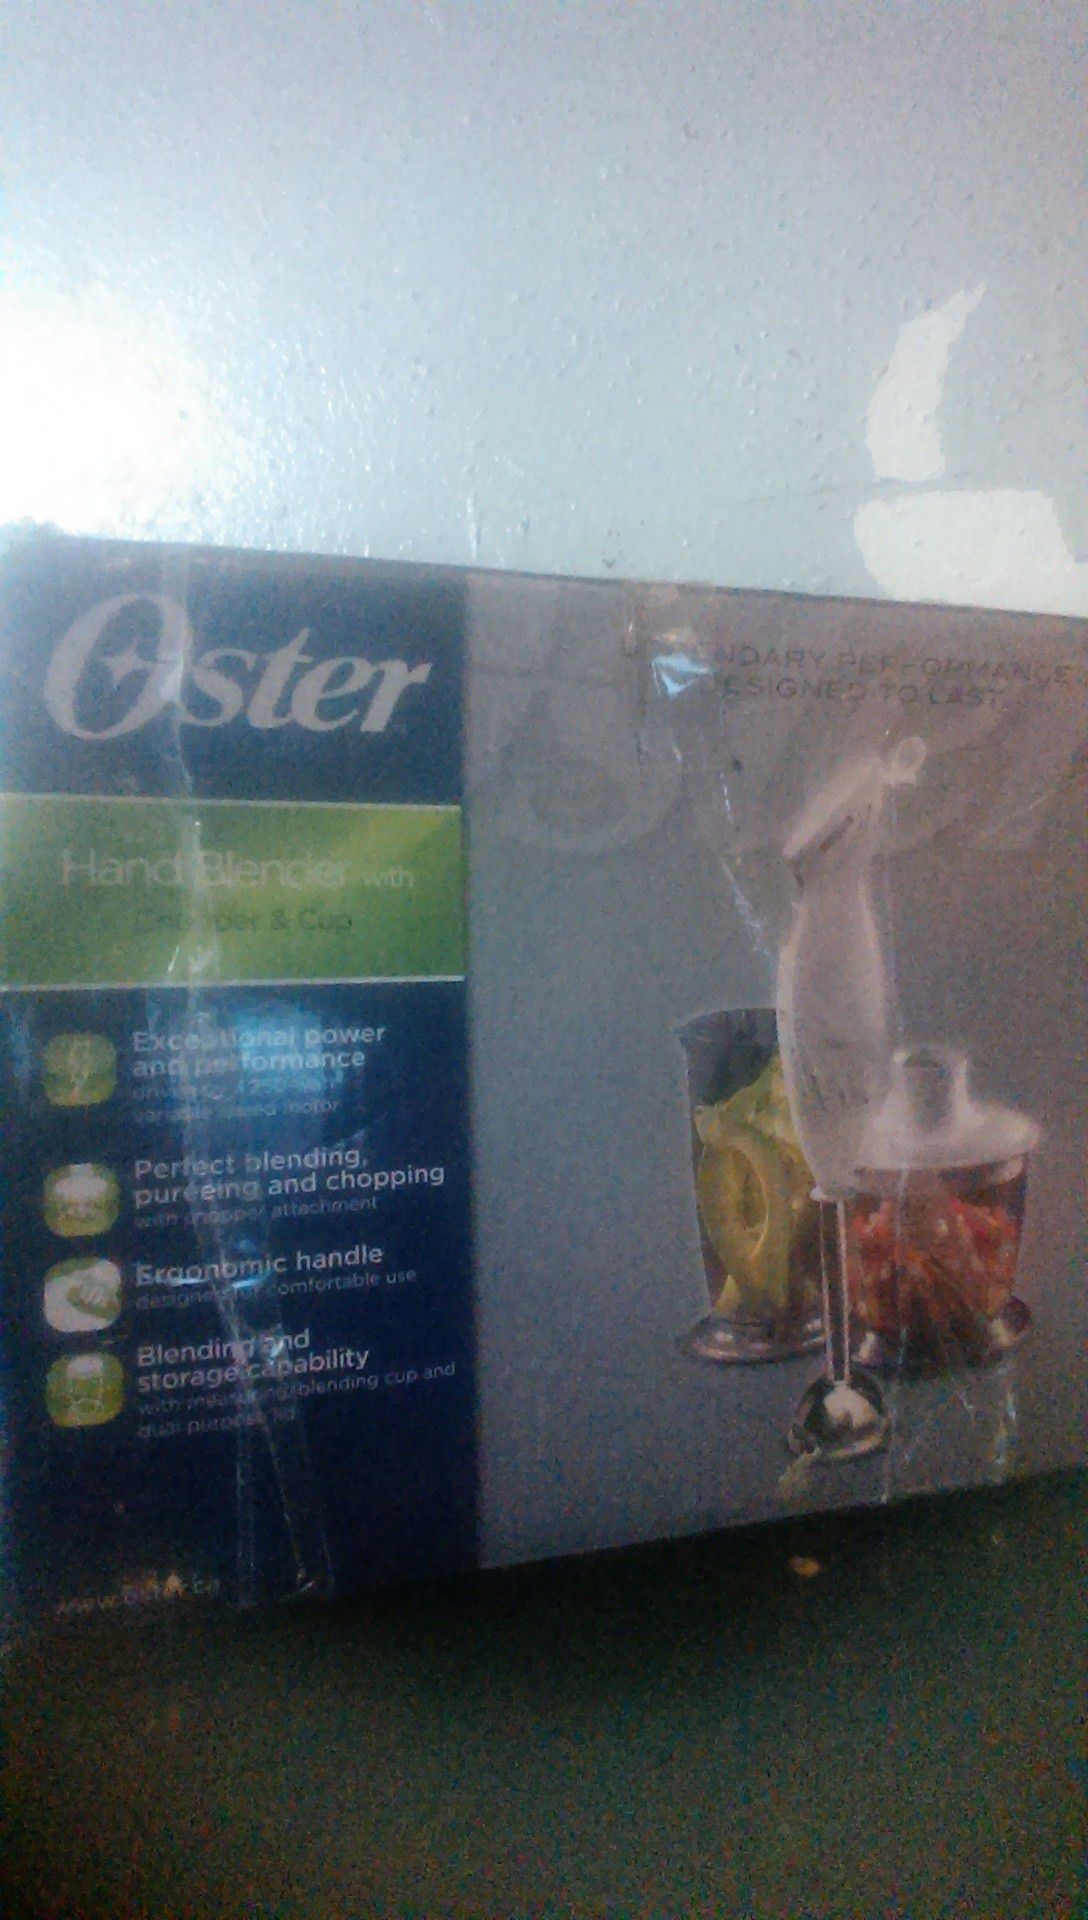 Oster hand blender with chopper and cup